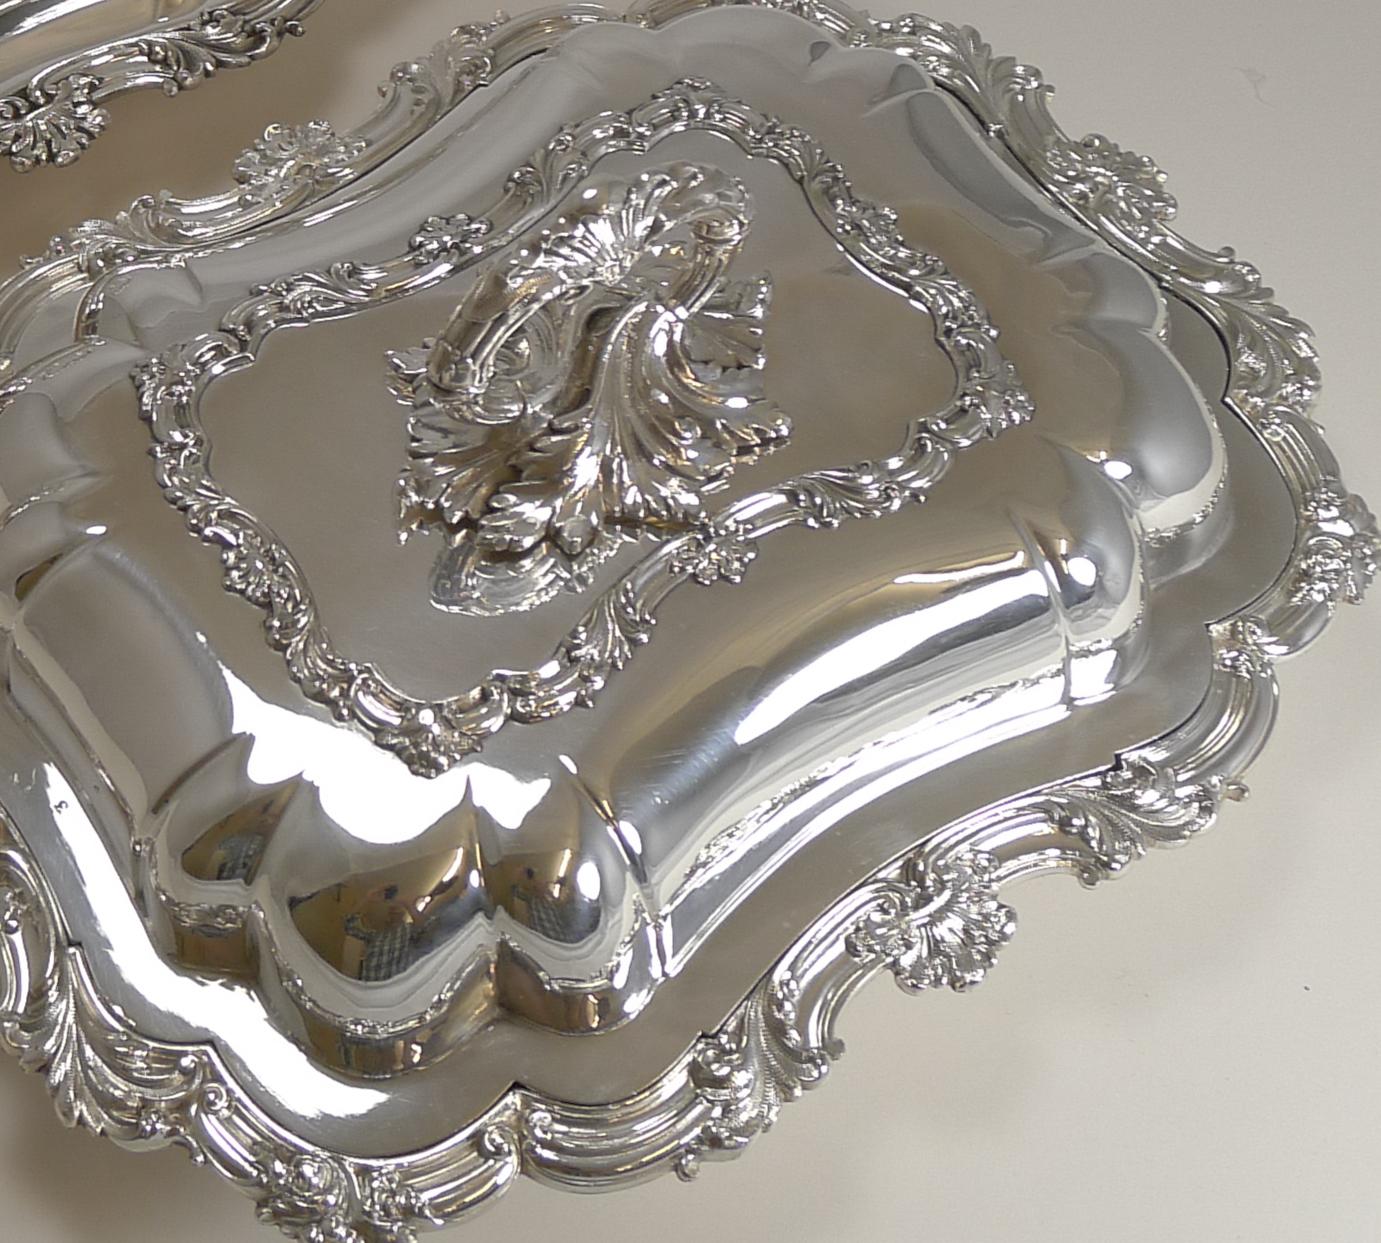 Early 20th Century Fine Pair of Antique English Entree Dishes in Silver Plate by Walker and Hall